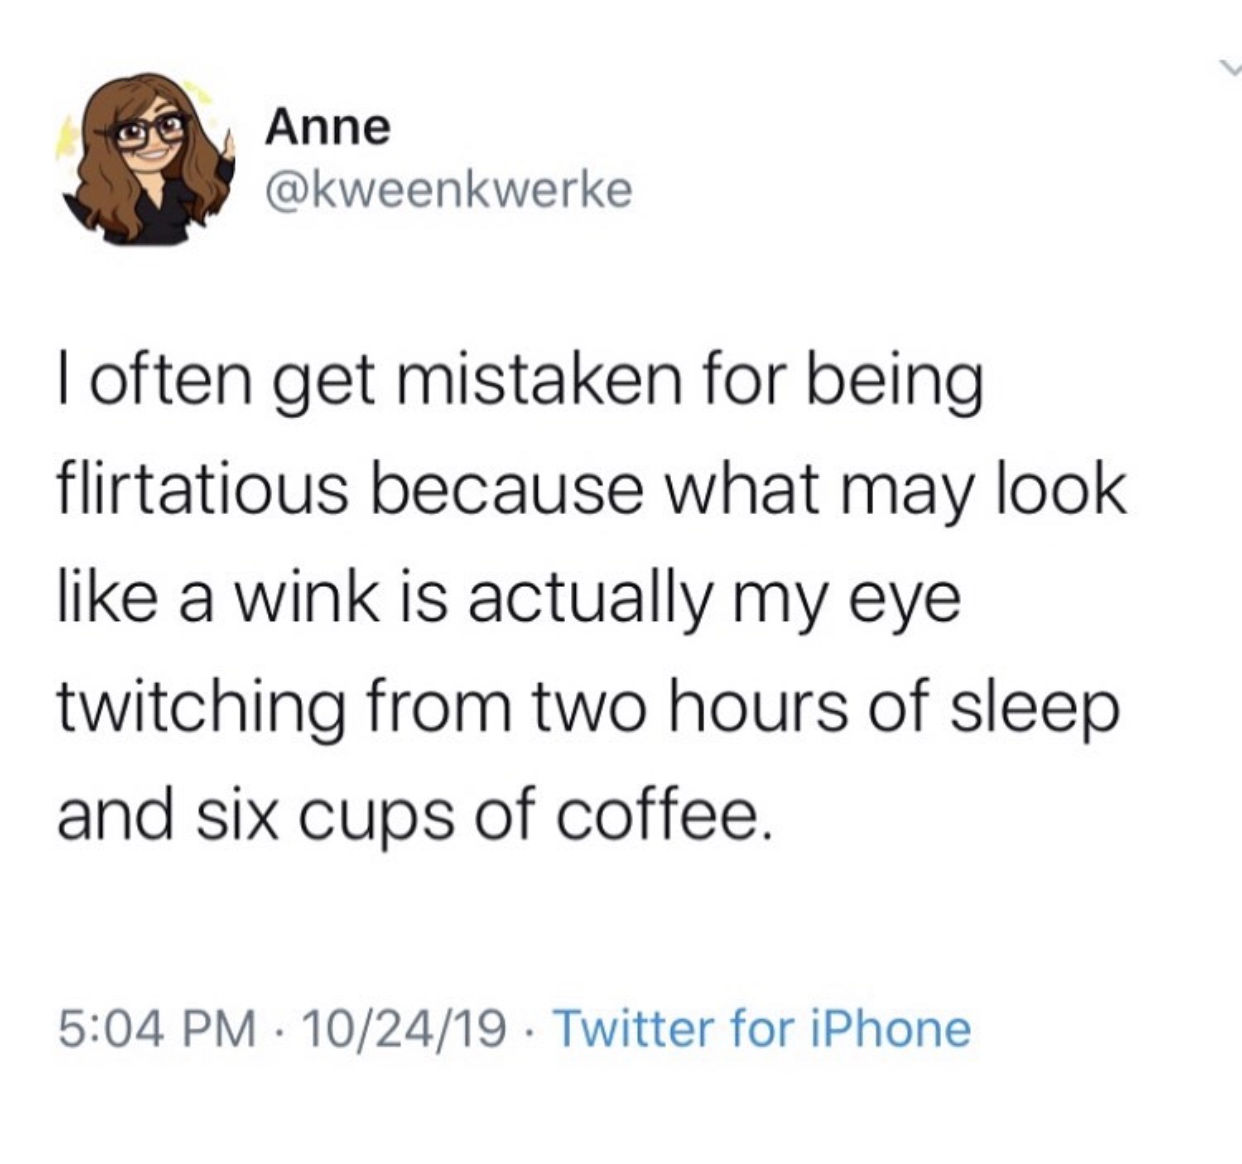 trust quotes - Anne I often get mistaken for being flirtatious because what may look a wink is actually my eye twitching from two hours of sleep and six cups of coffee. 102419 Twitter for iPhone